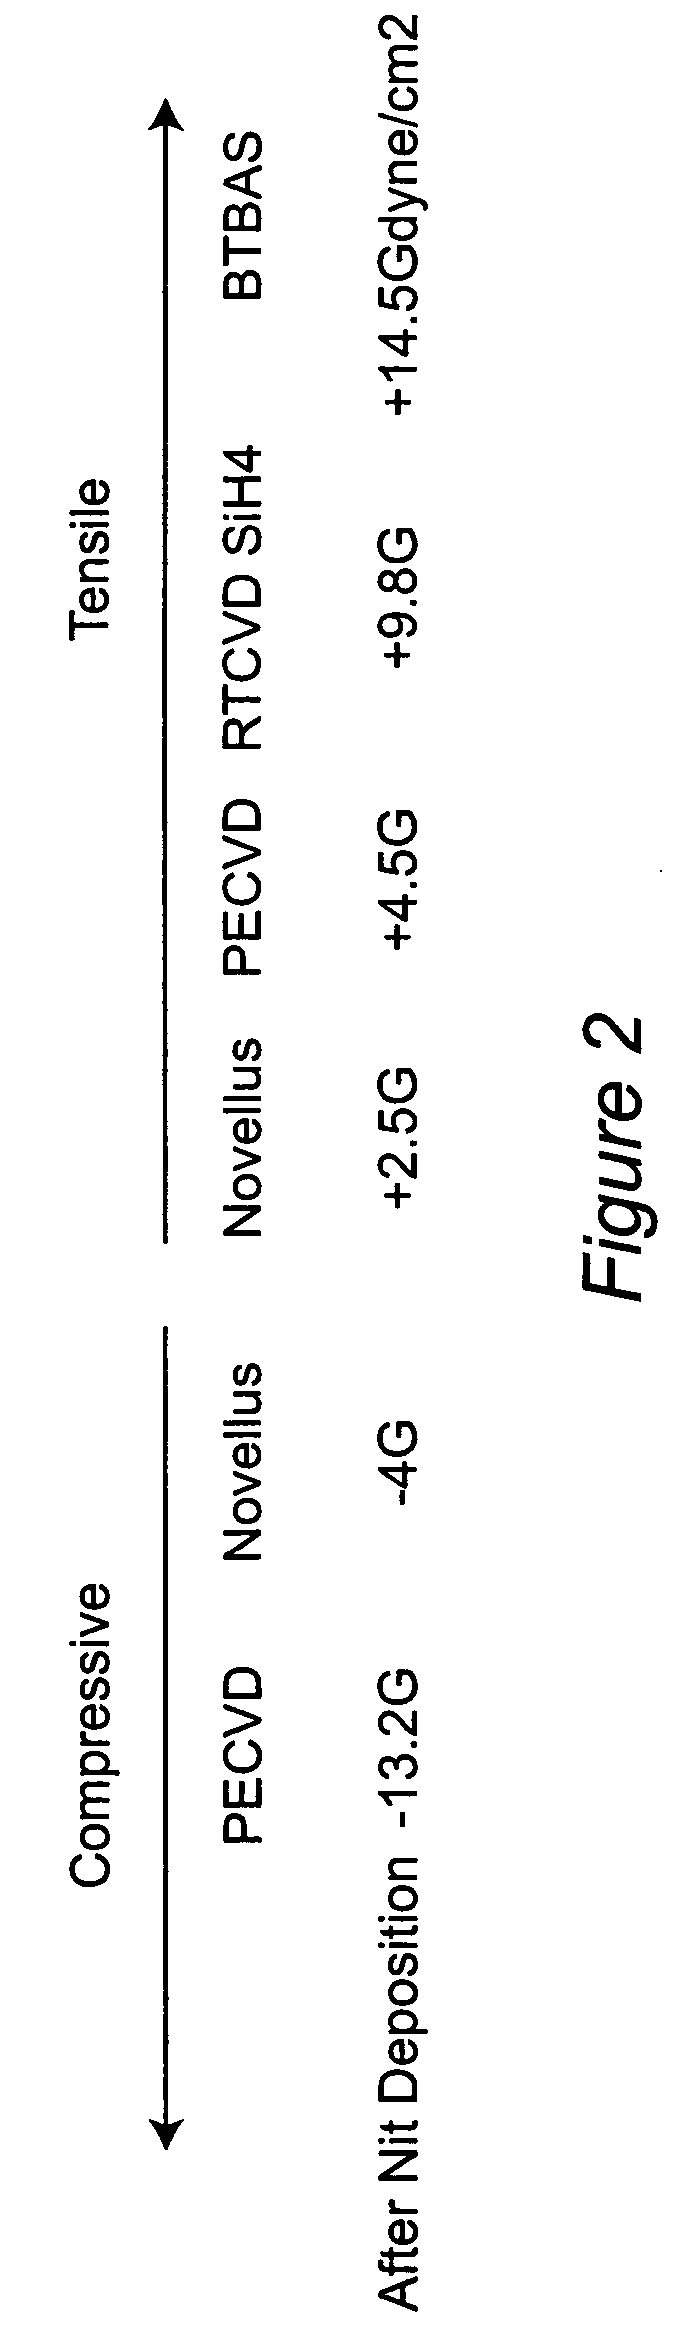 Material for contact etch layer to enhance device performance